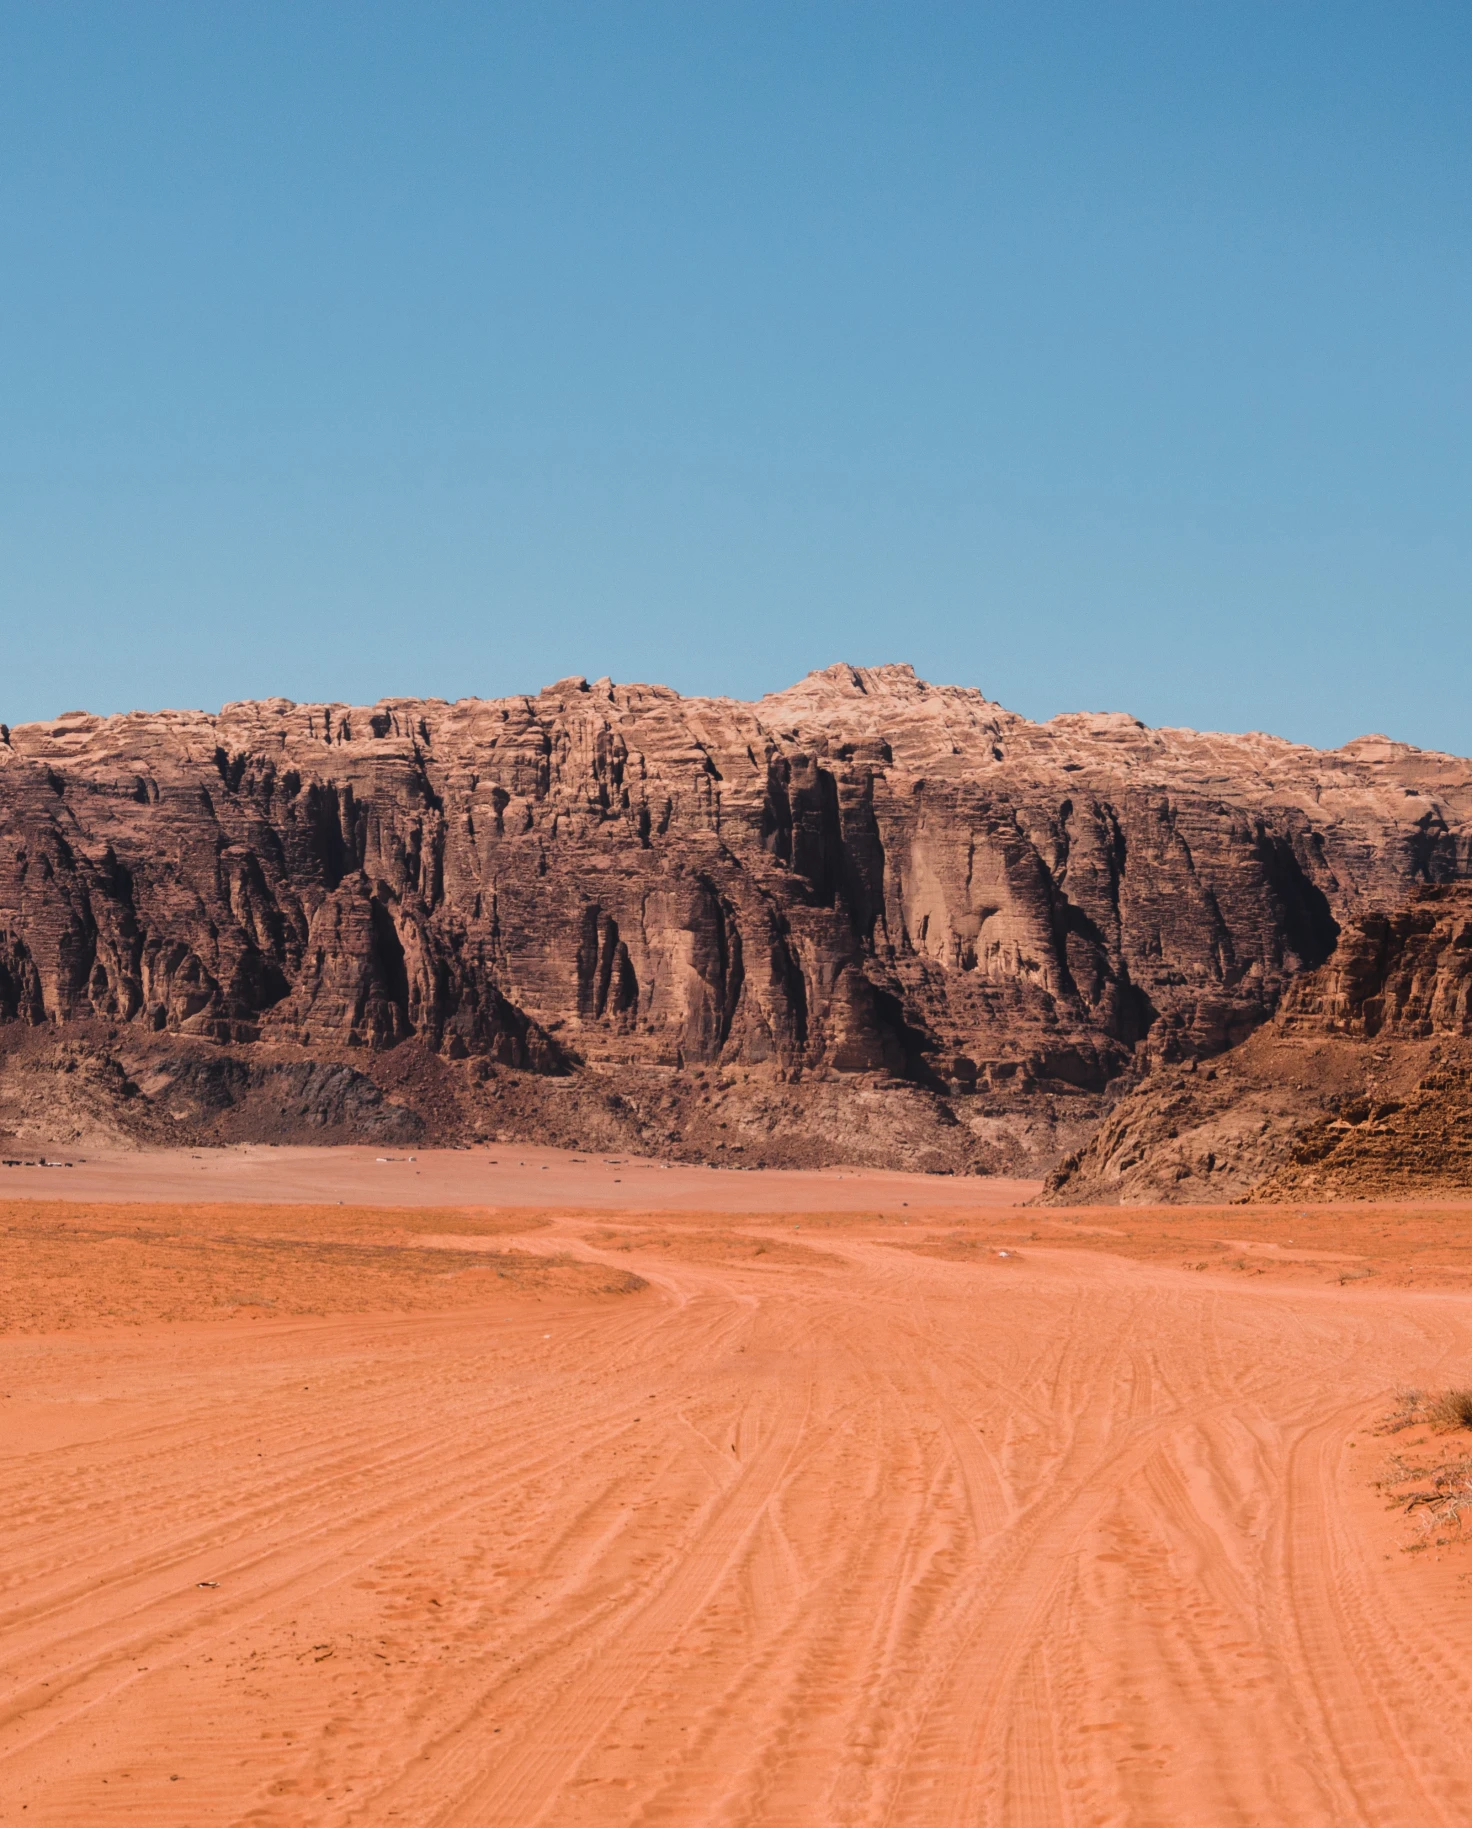 A visit to Jordan with red dirt roads and dark brown and red rock structures against a blue sky.